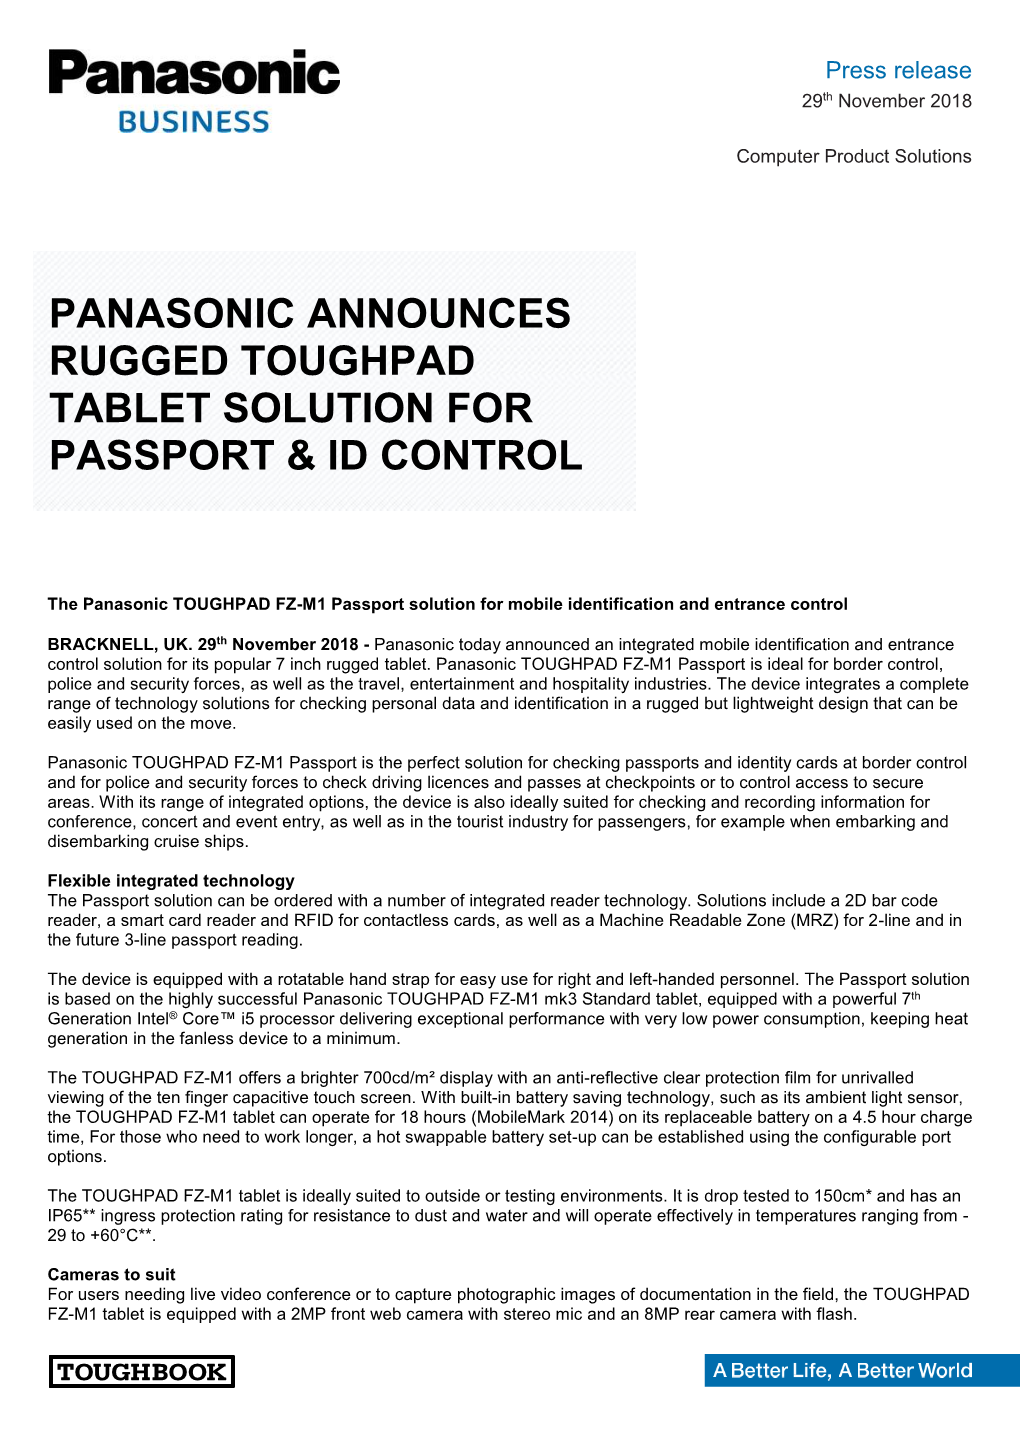 Panasonic Announces Rugged Toughpad Tablet Solution for Passport & Id Control